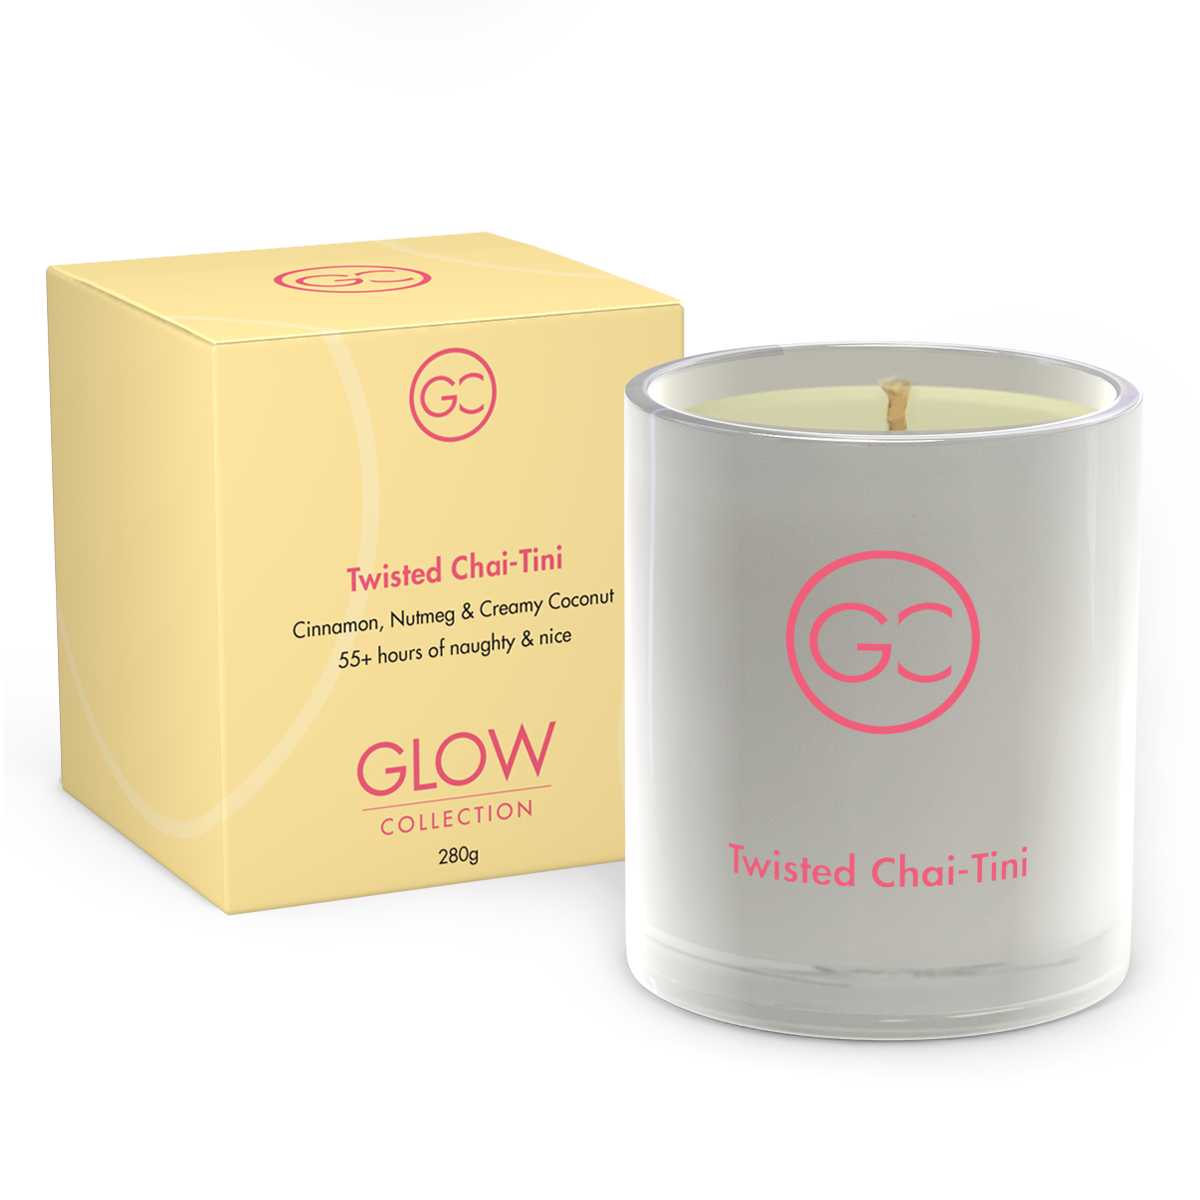 Twisted Chai-Tini Scented Soy Candle 55hr Burn